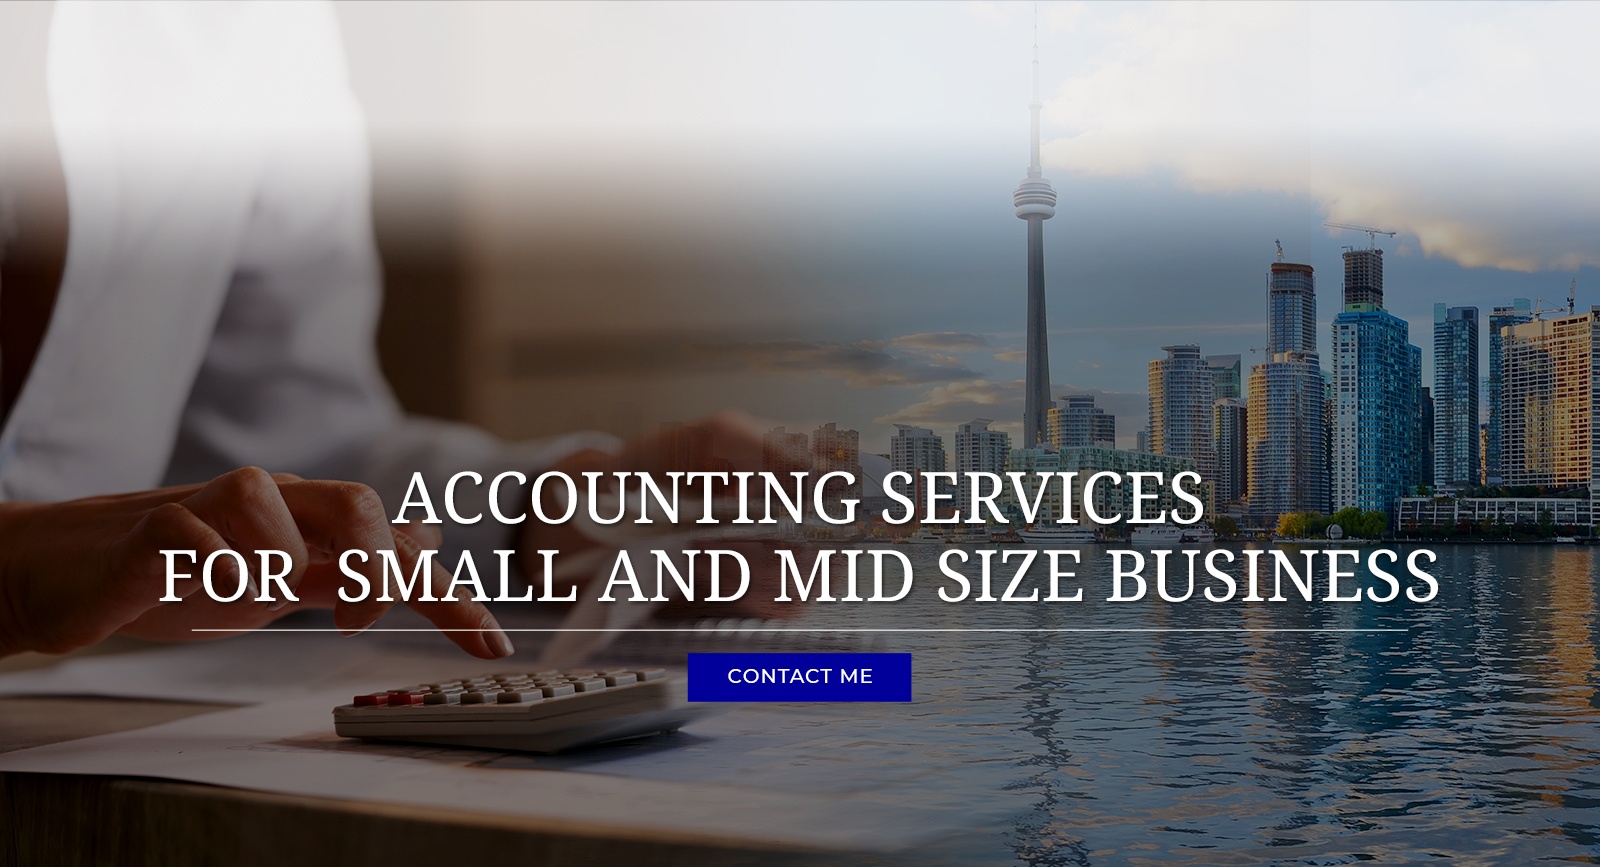 Accounting services for small and mid-size businesses